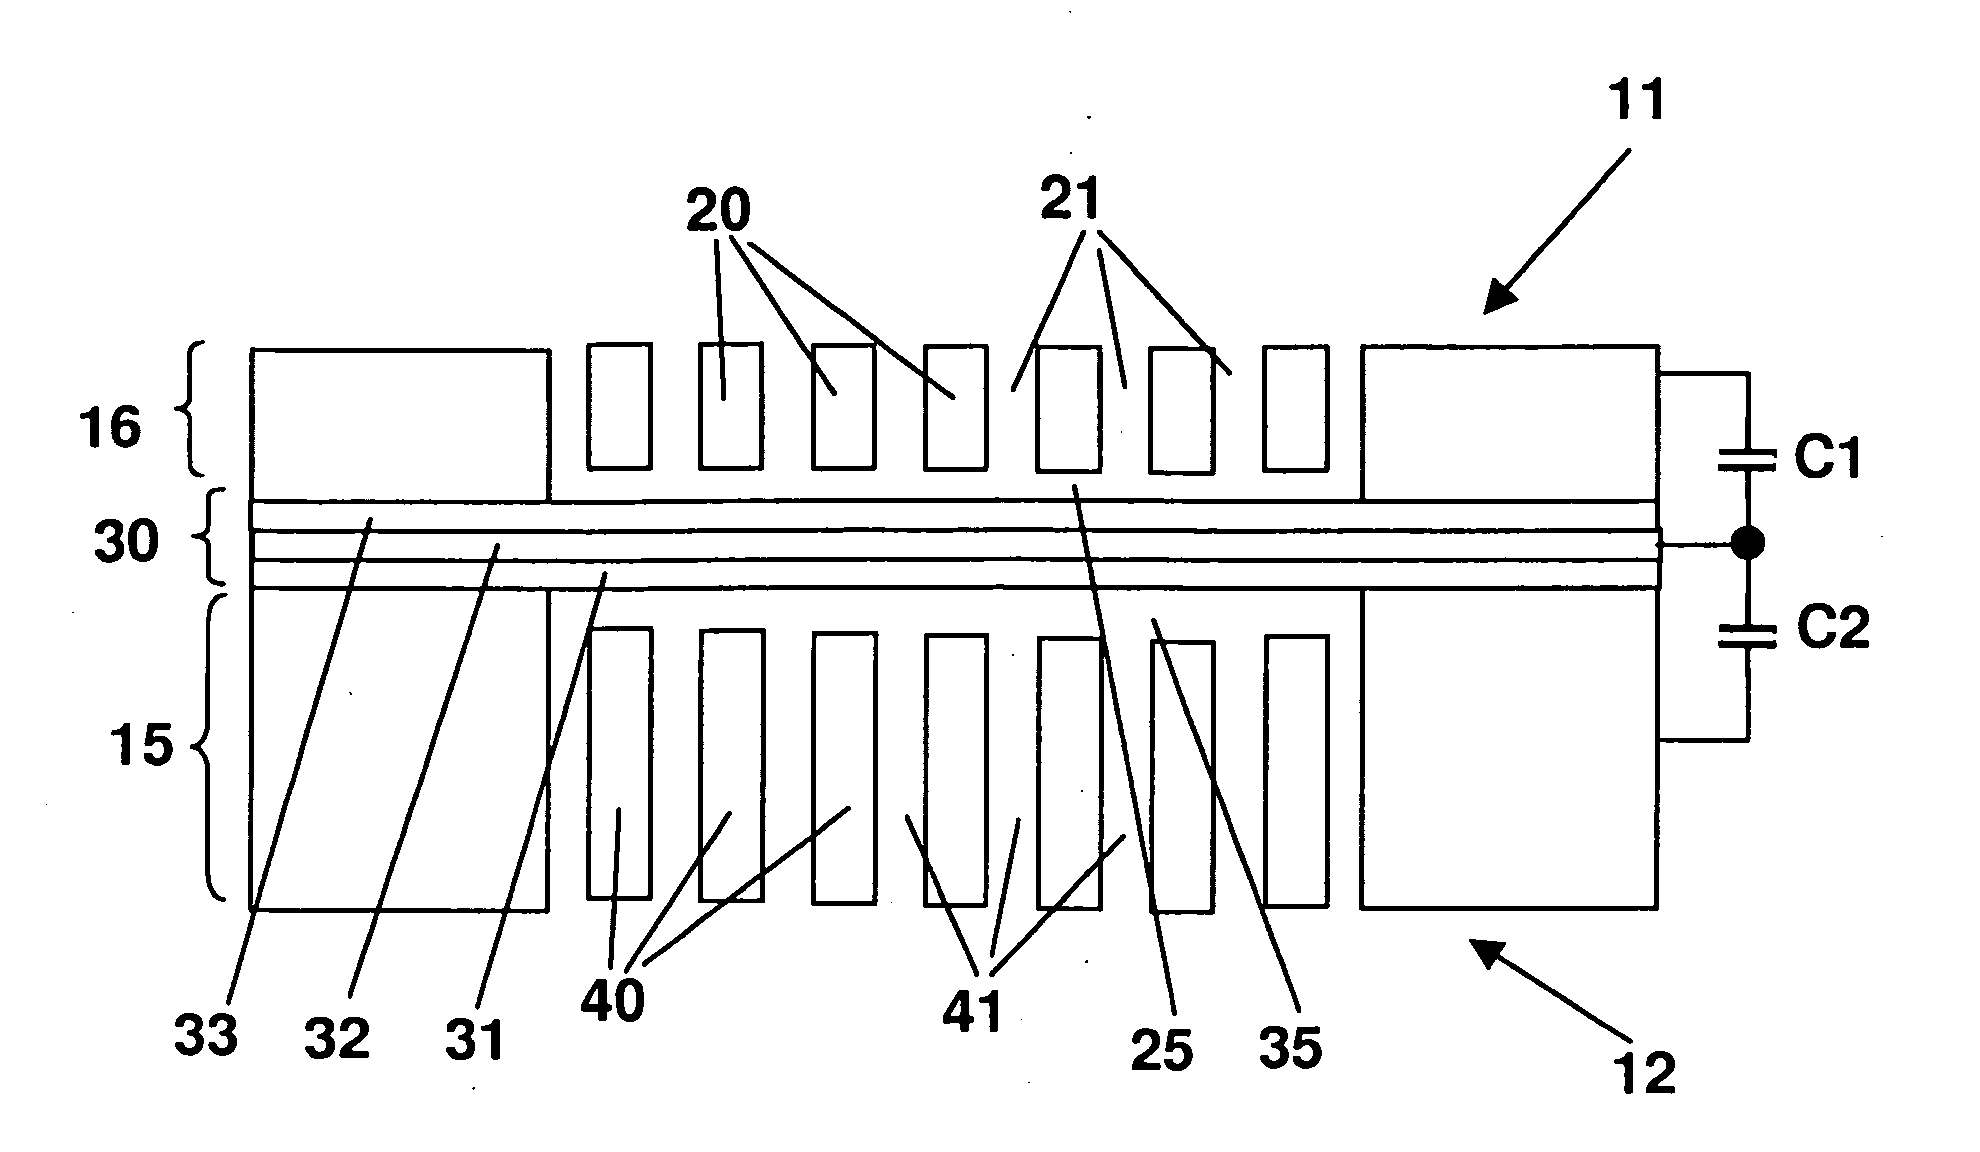 Micromechanical Structure for Receiving and/or Generating Acoustic Signals, Method for Producing a Micromechnical Structure, and Use of a Micromechanical Structure